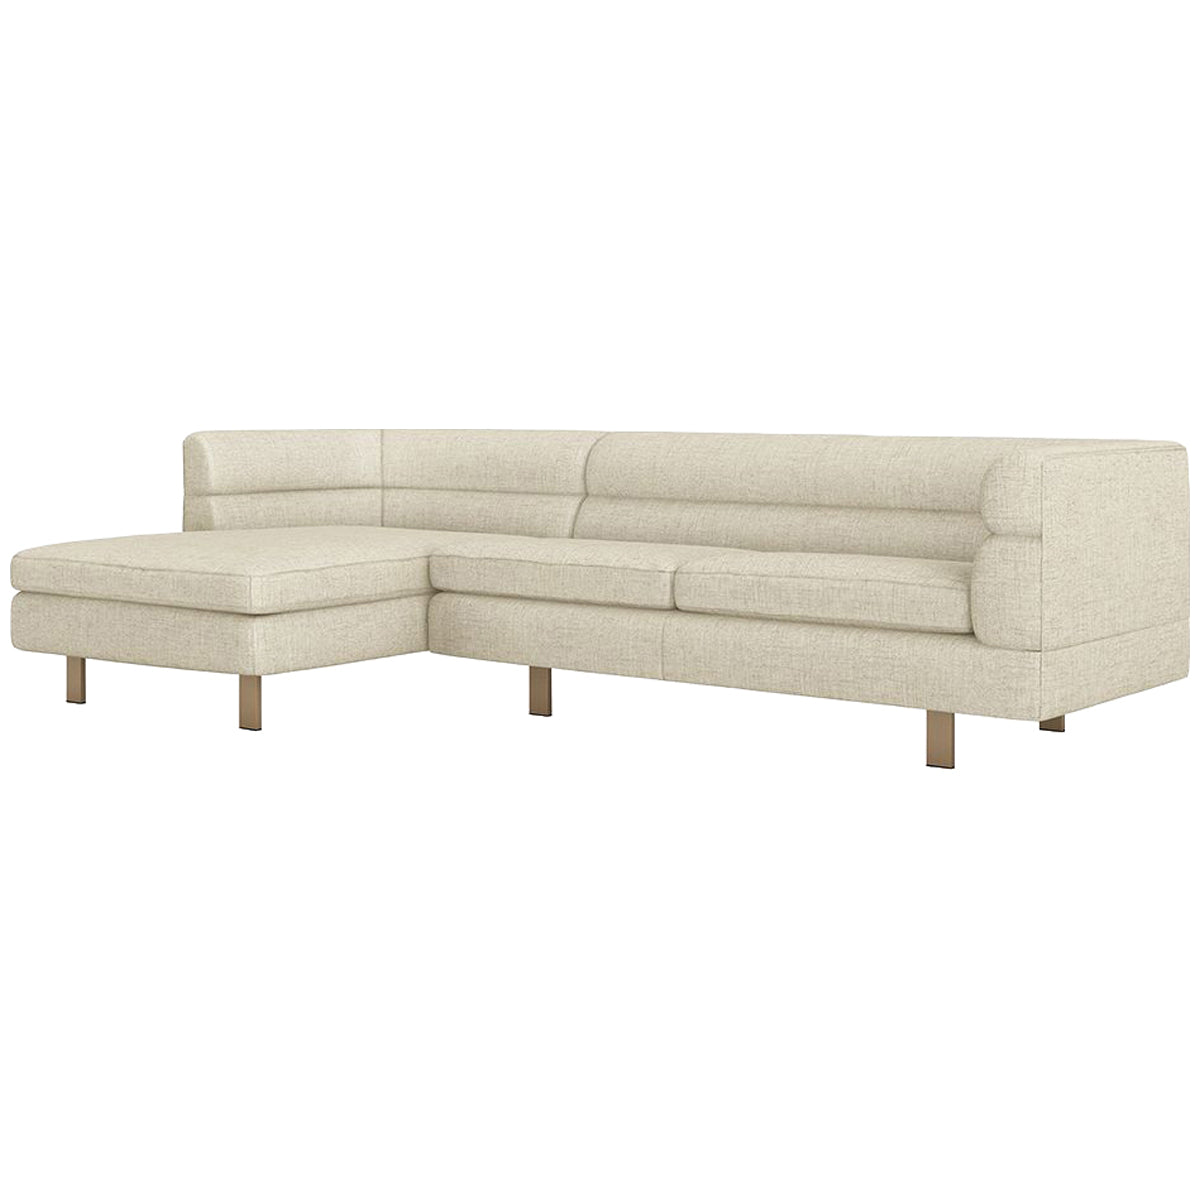 Interlude Home Ornette 2-Piece Sectional - Bluff